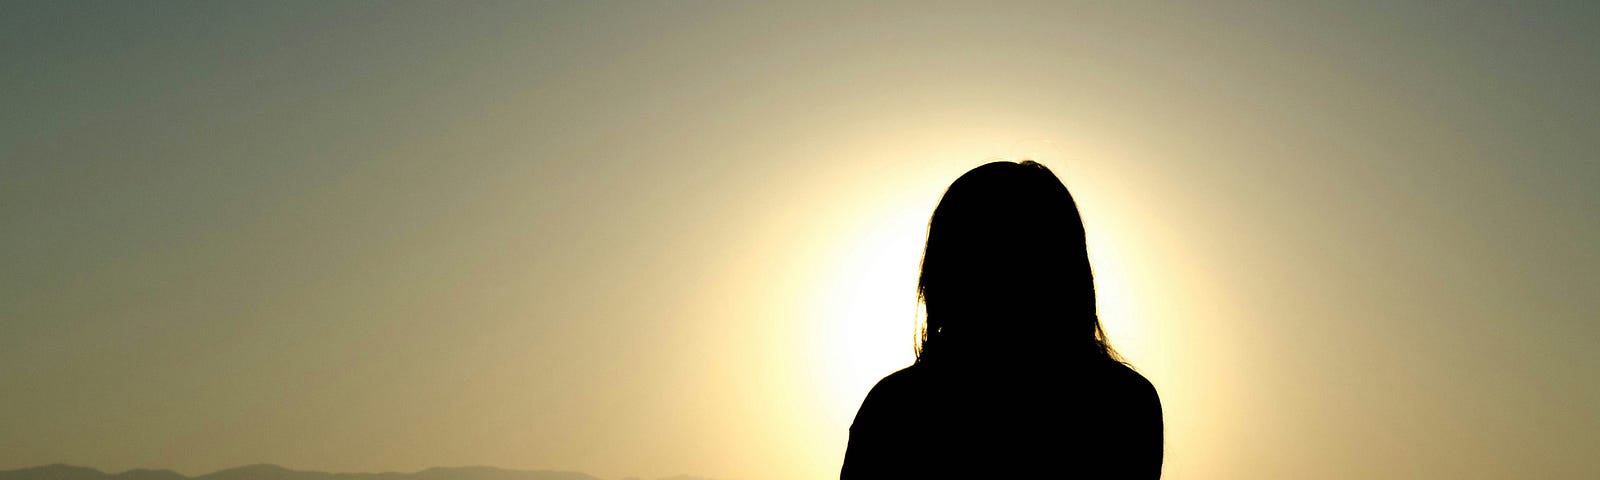 A silhouette of a person meditating in a seated position with the sun setting behind them.